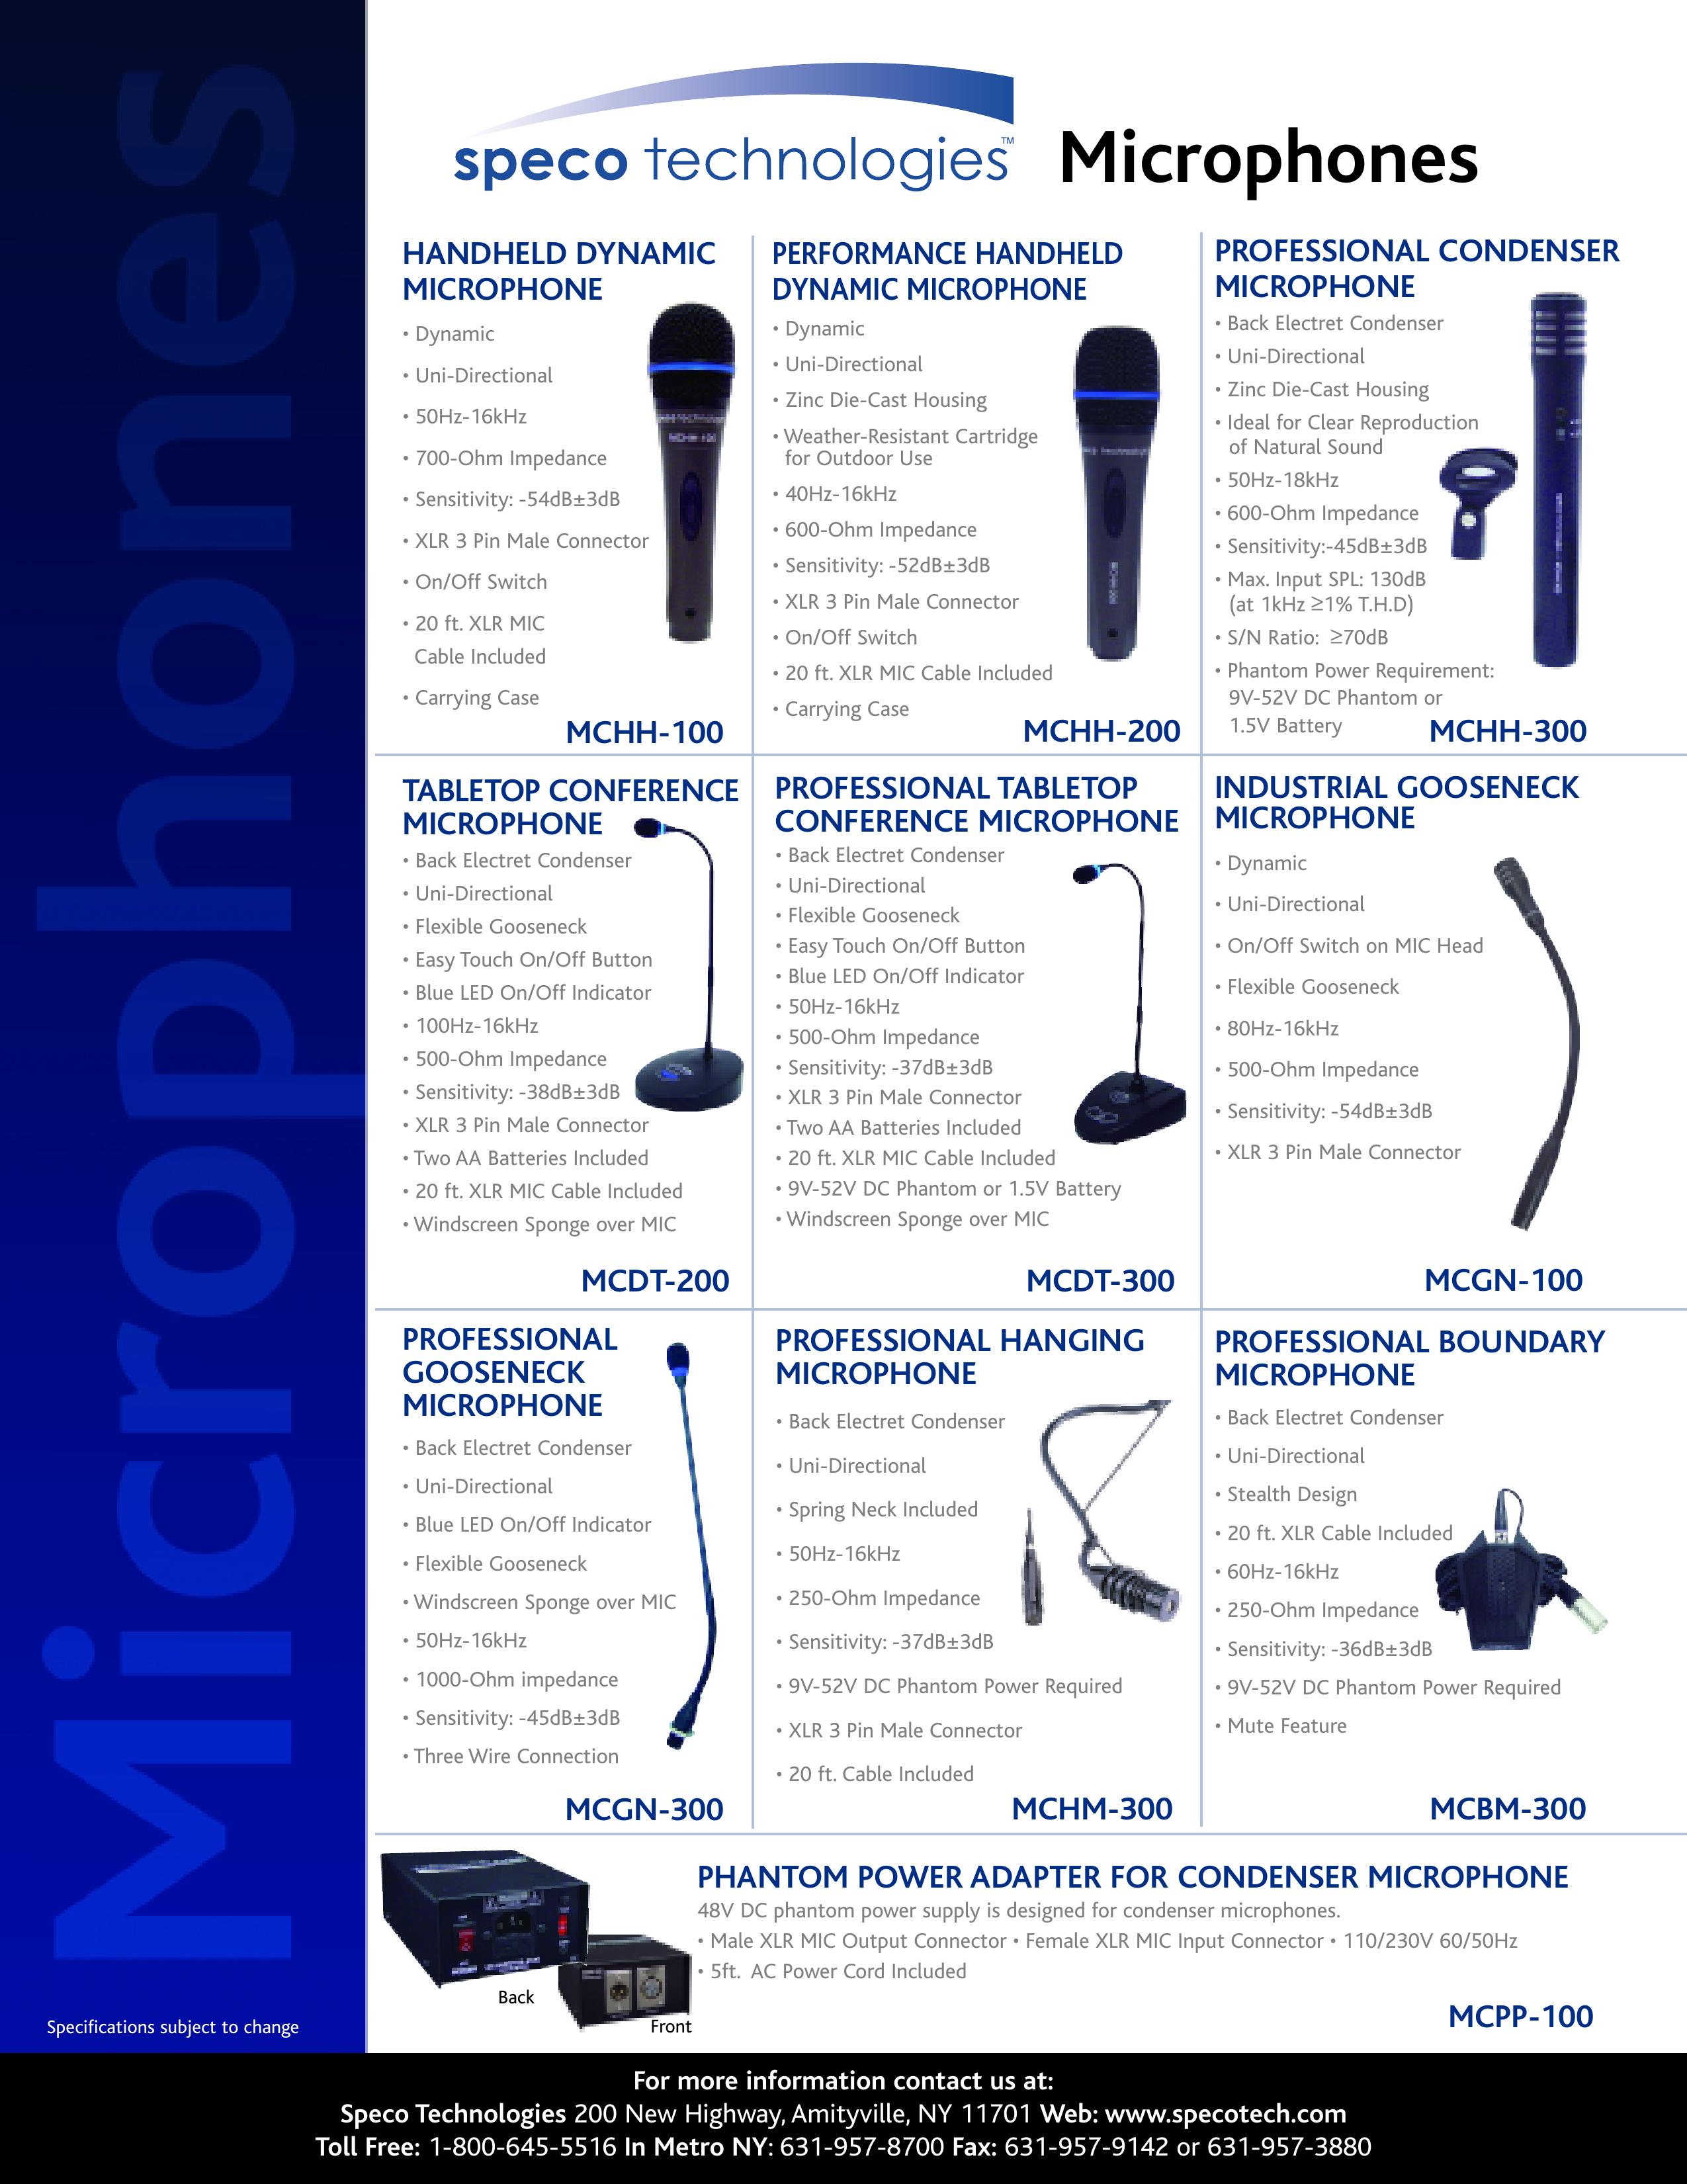 Speco Technologies MCGN-300 Microphone User Manual